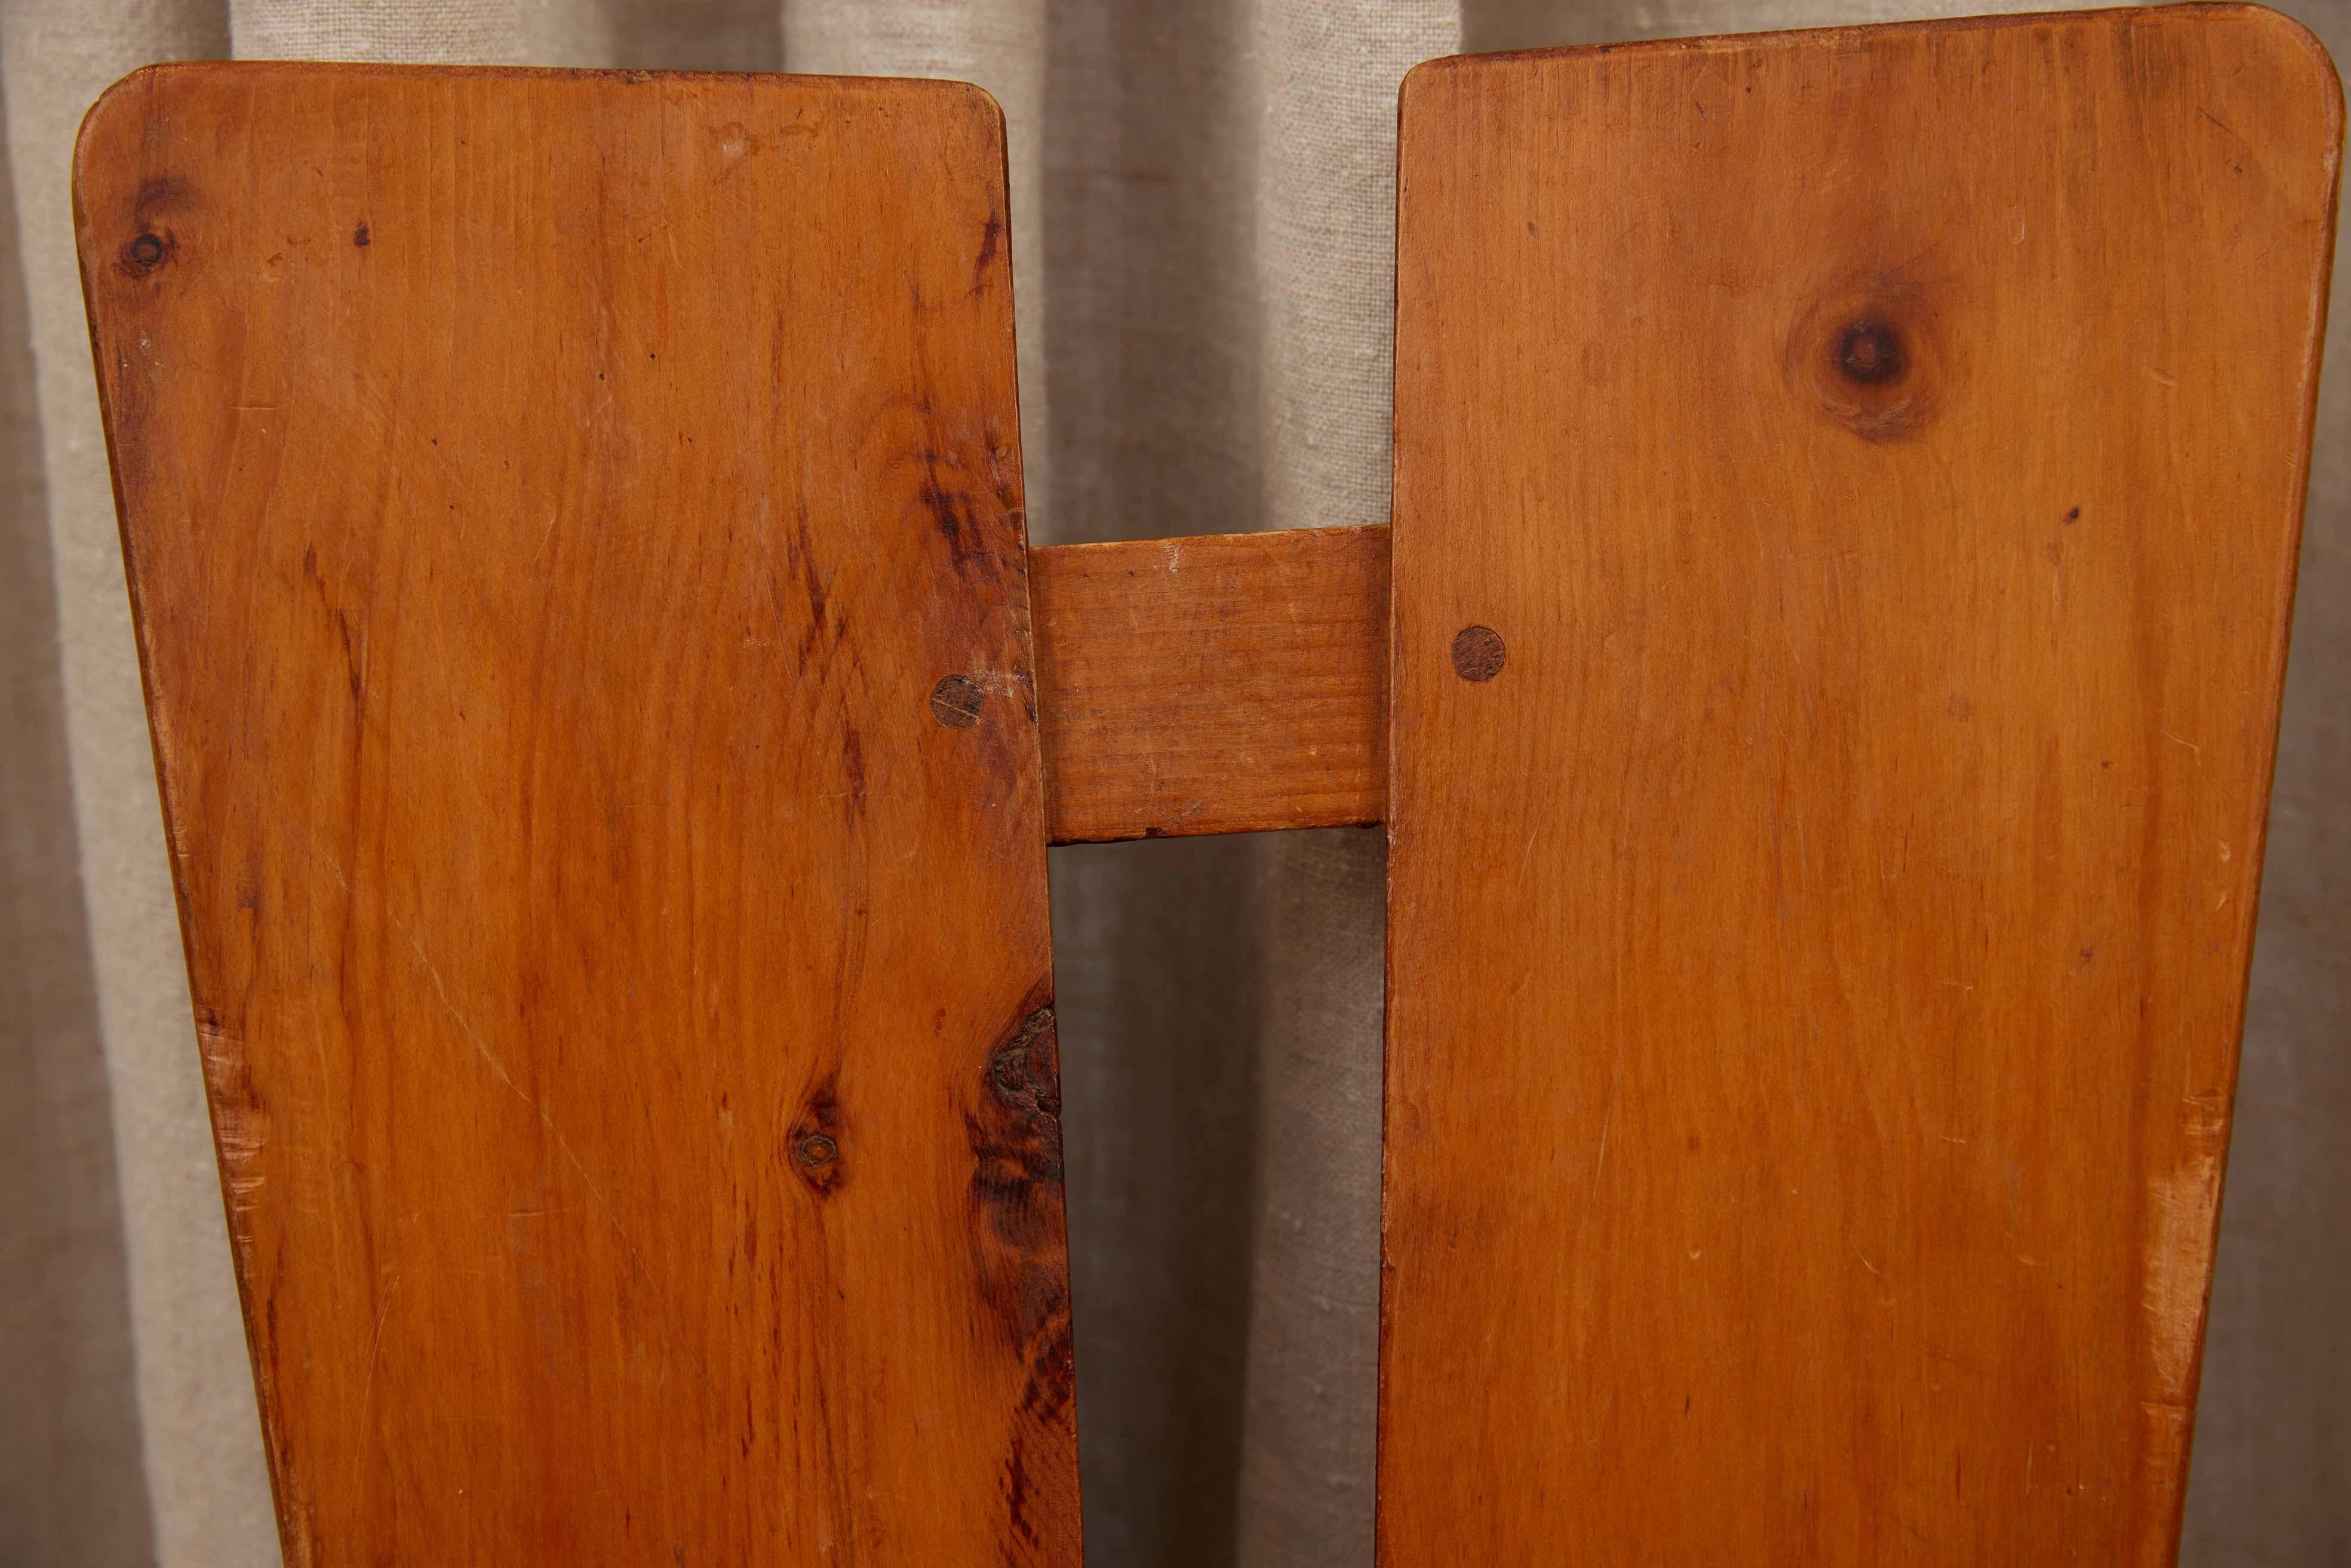 Christian Durupt, Dining Chairs, Pine, France, 1960s For Sale 5